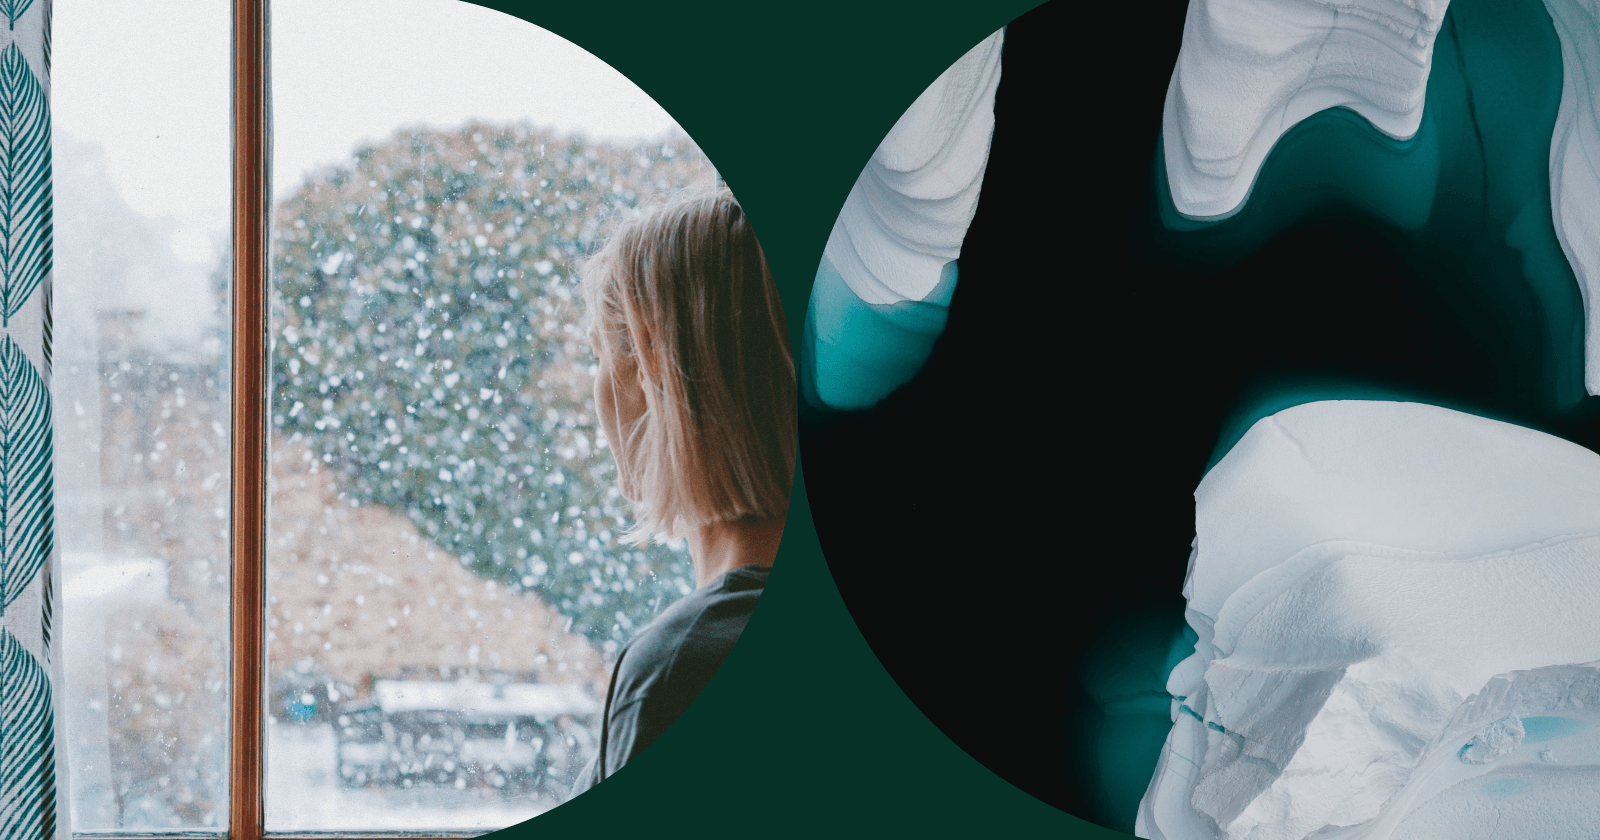 Two Half Ellipses: Left is of Person Looking Outside of a Rainy Window and Right is of an Iceberg Grotto